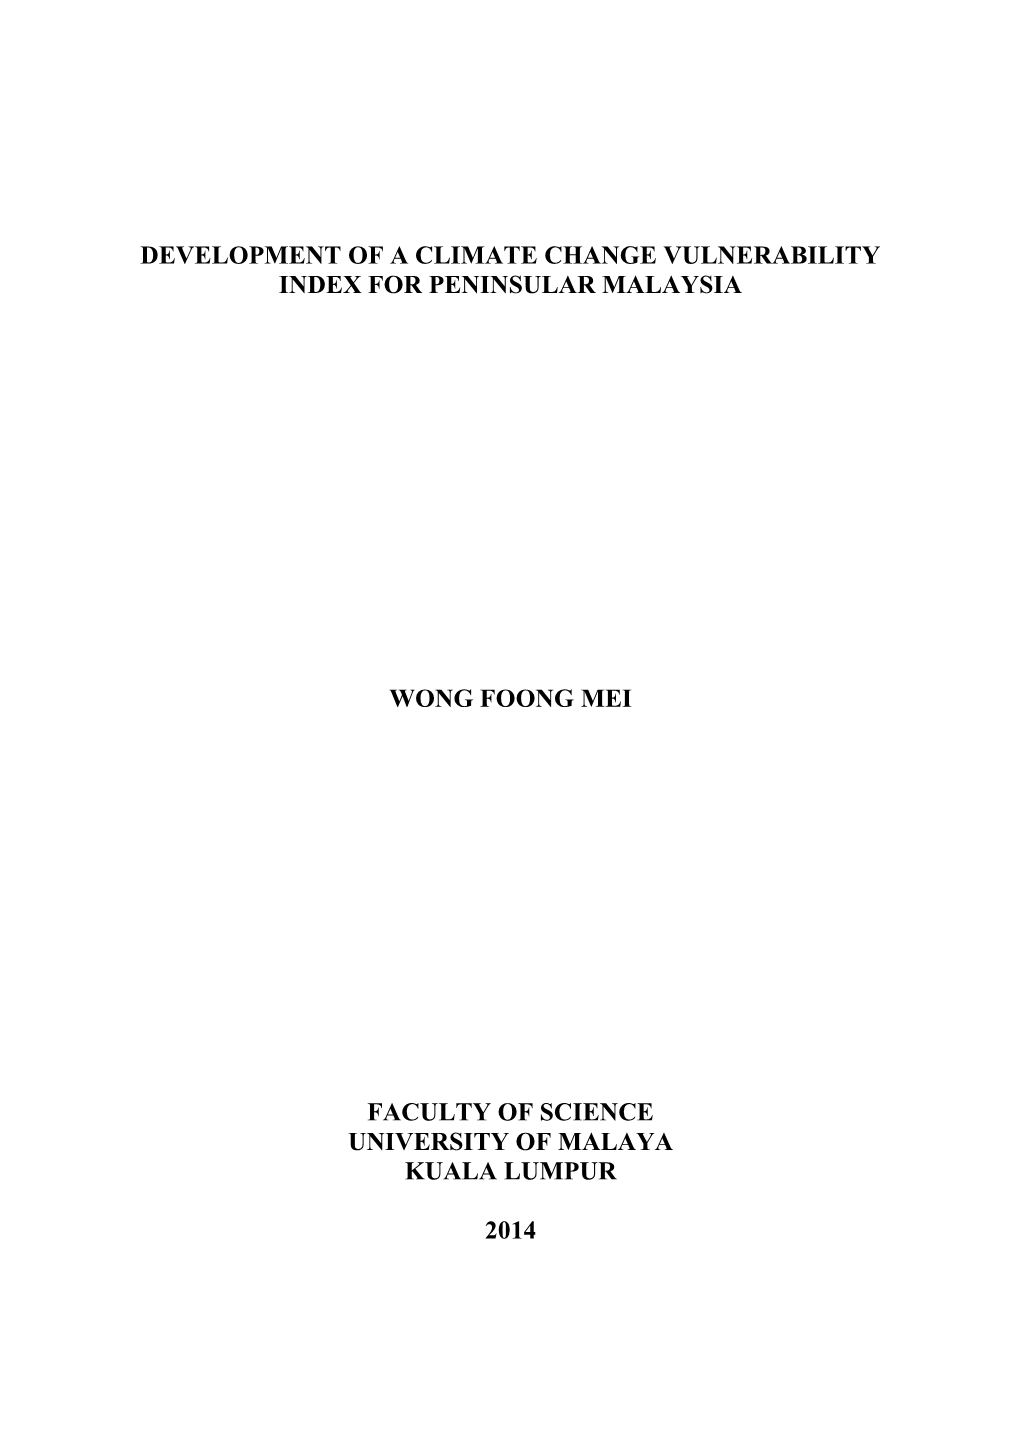 Development of a Climate Change Vulnerability Index for Peninsular Malaysia Wong Foong Mei Faculty of Science University of Mala